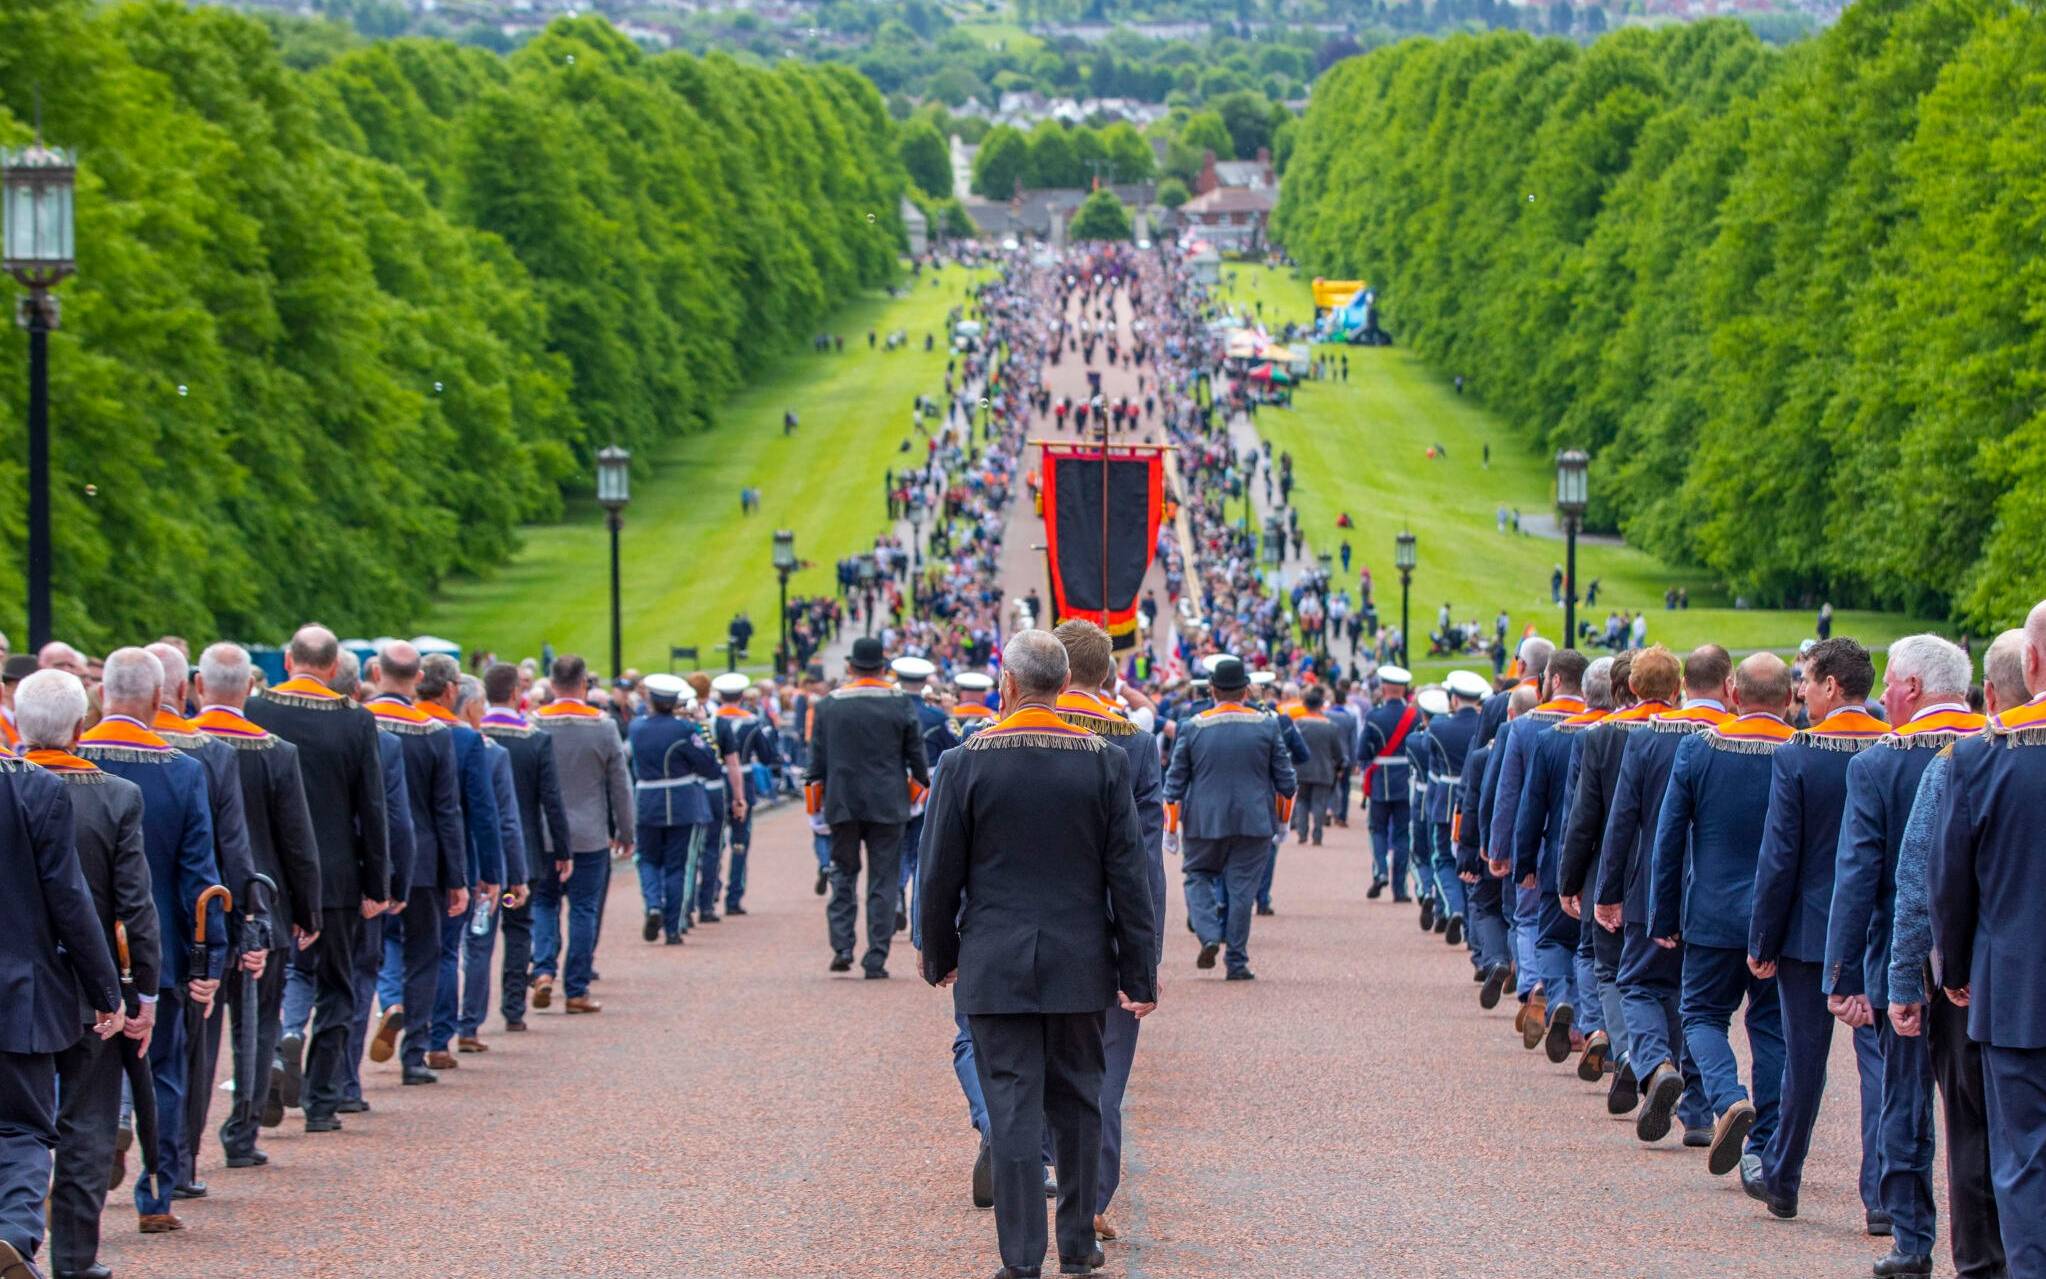 Orange Order members gather at Stormont for their Centenary parade, in Belfast on May 28, 2022, to mark the hundred years of the formation of the Northern Ireland State. (Photo by Paul Faith / AFP)